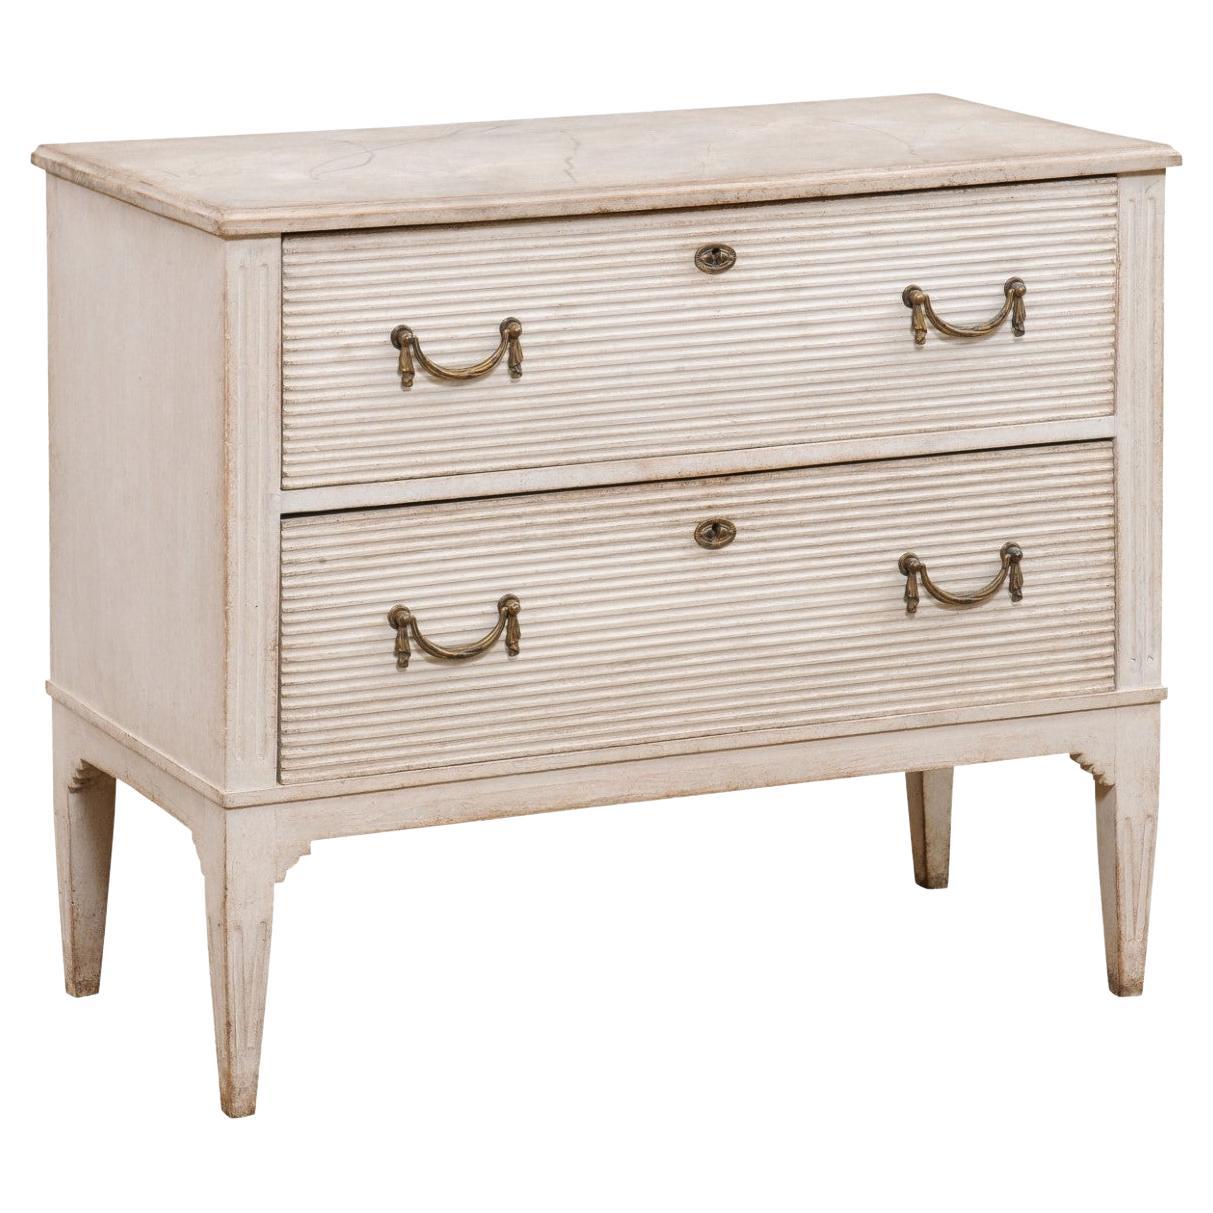 Swedish Gustavian Style 19th Century Painted Wood Chest with Reeded Accents